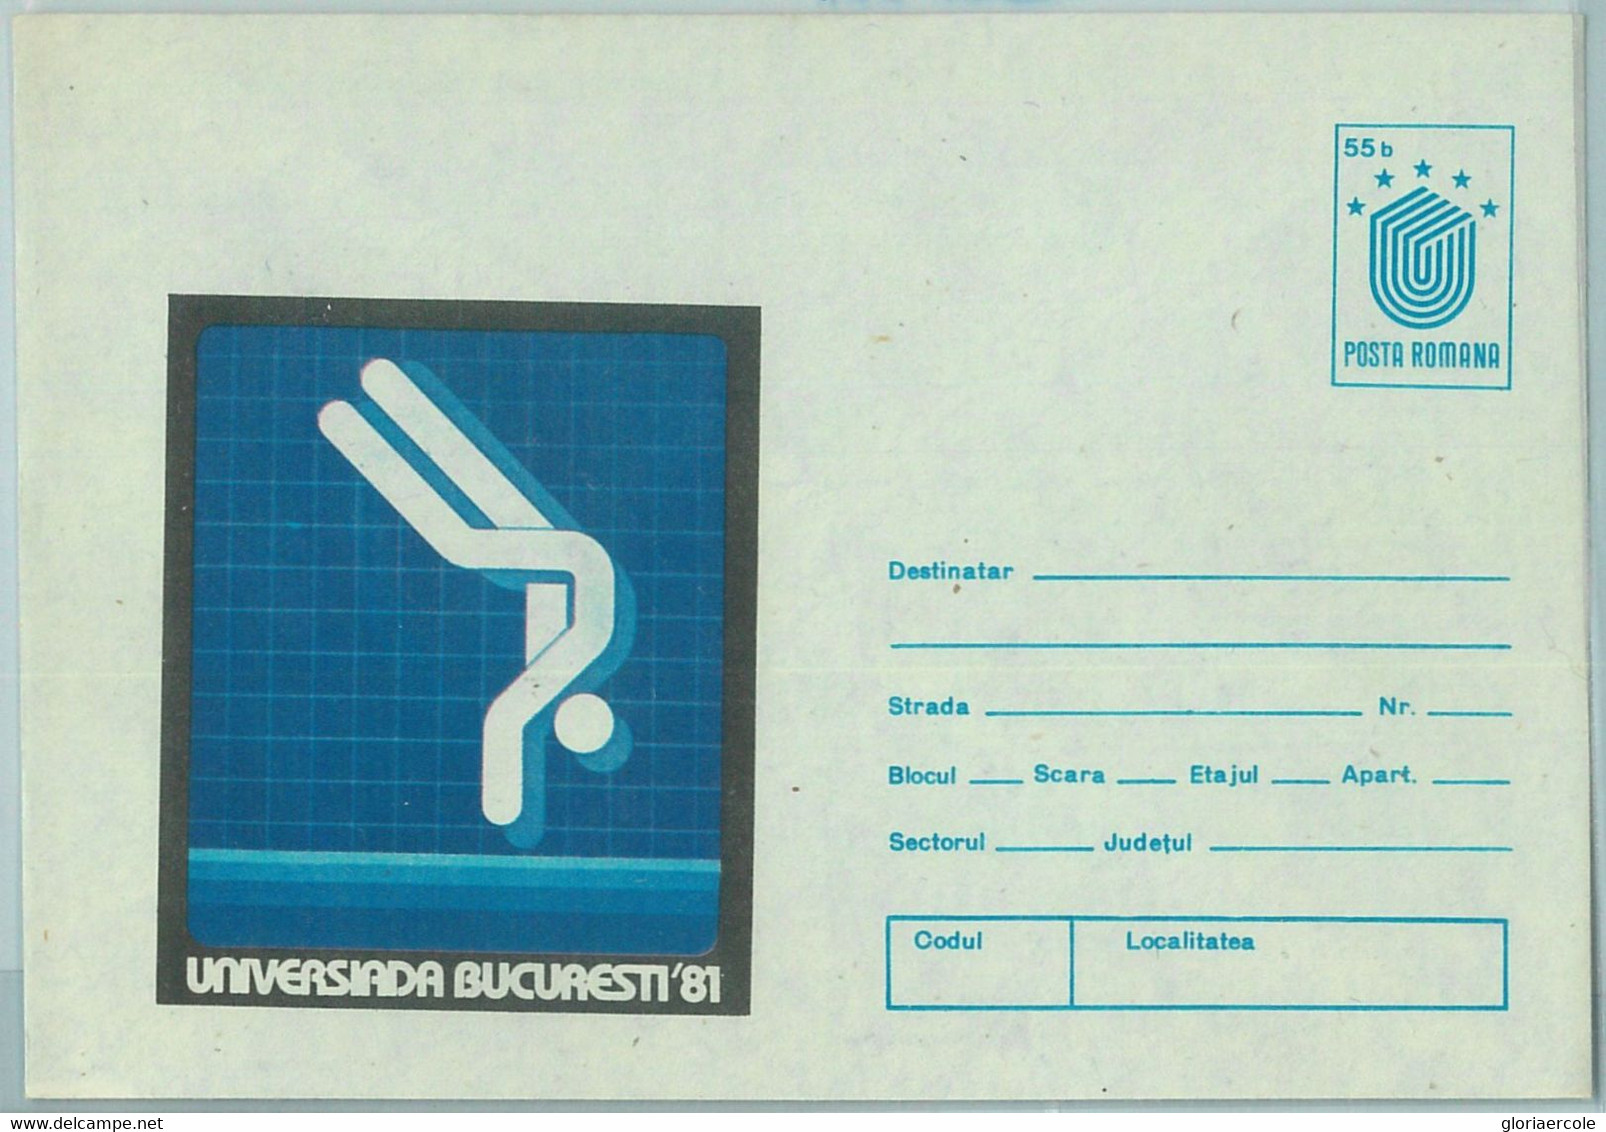 67803 - ROMANIA  - POSTAL HISTORY - STATIONERY COVER - 1981, Universiade Games Bucarest '81, Diving - Diving